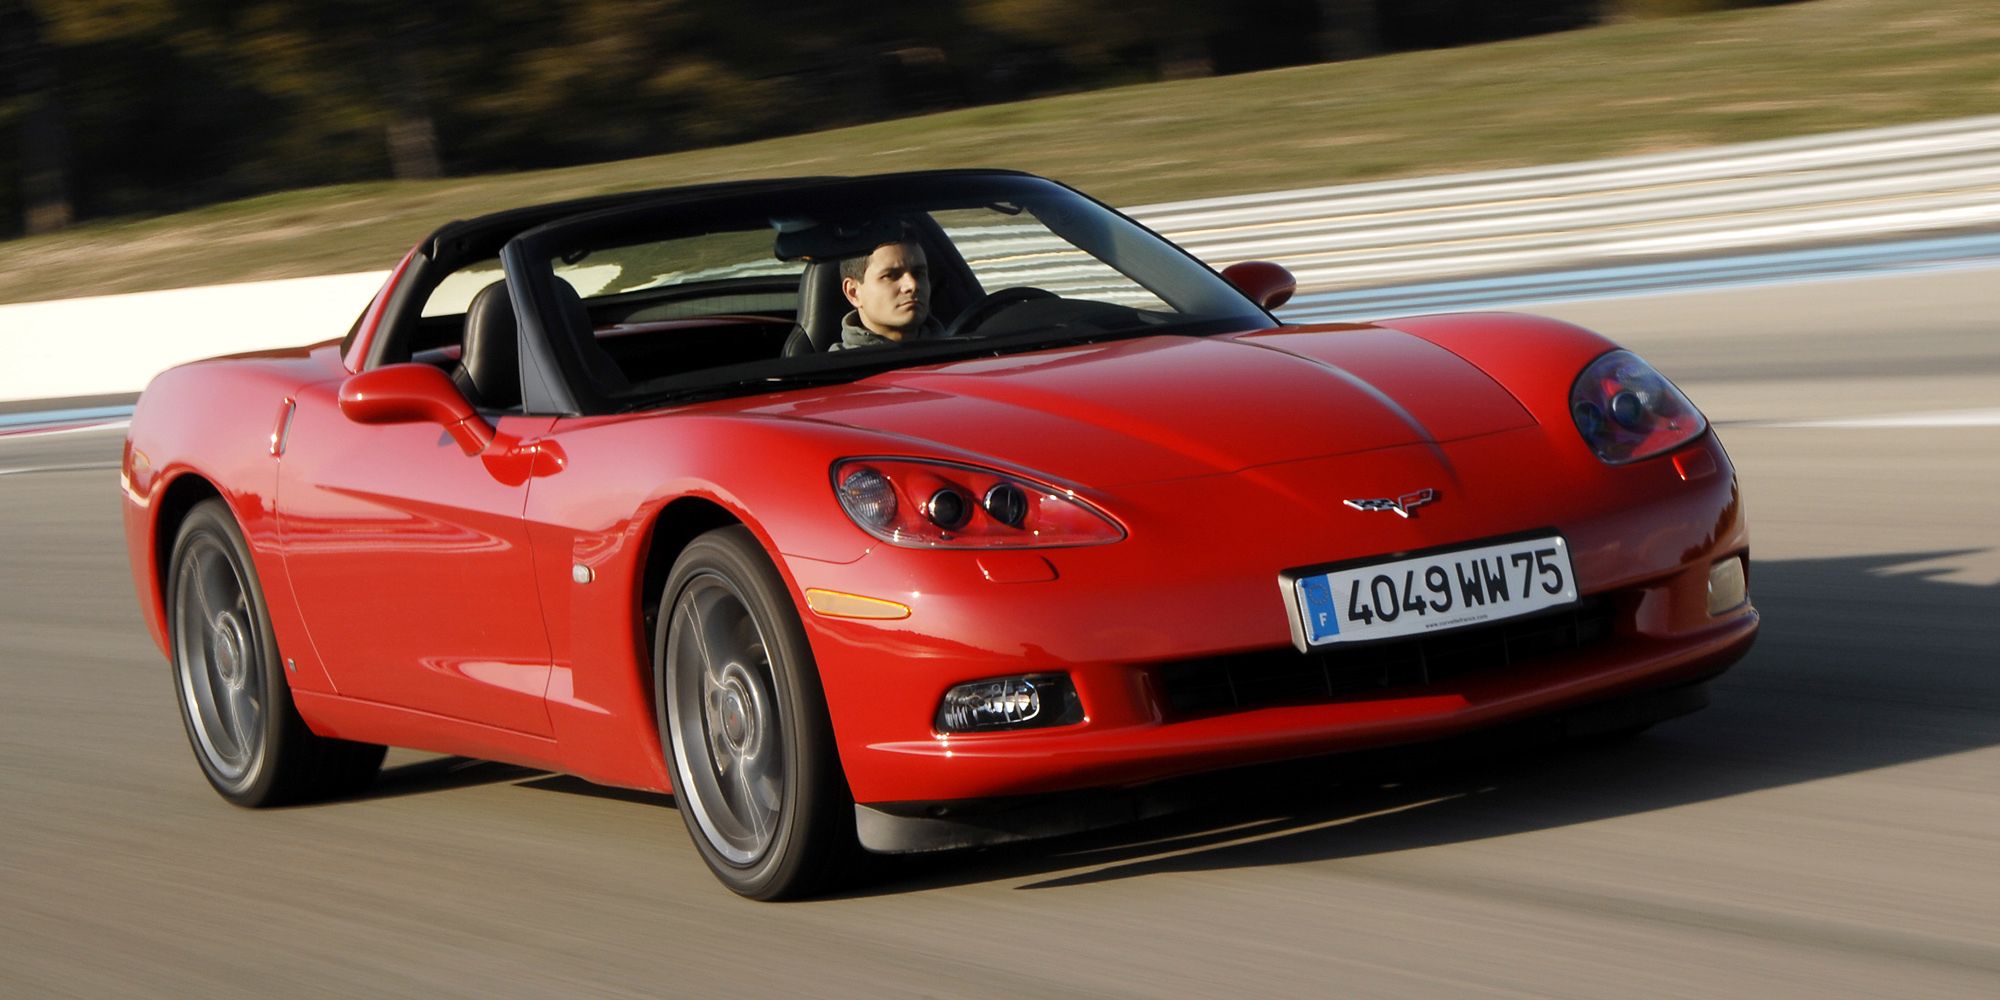 A red C6 Corvette on the move